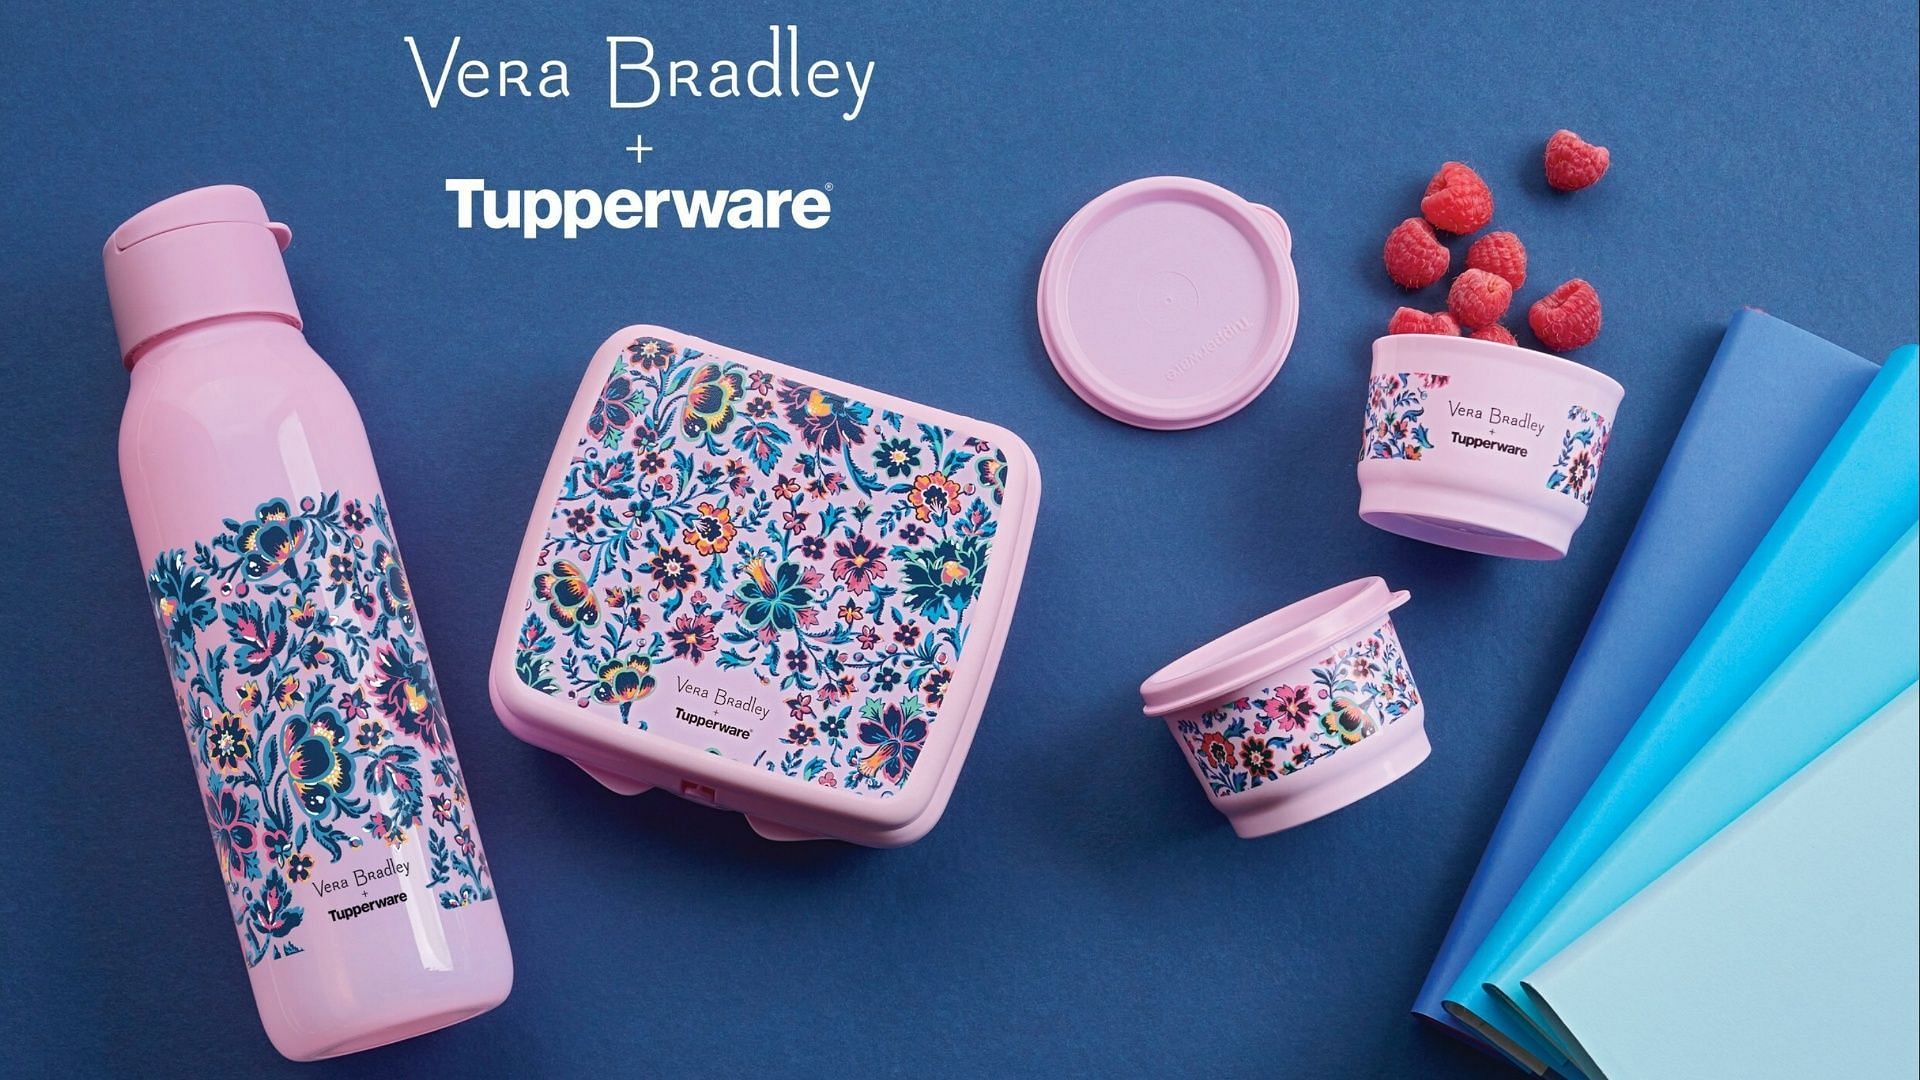 Tupperware x Vera Bradley limited edition collection: where to buy, price, products, and all you need to know